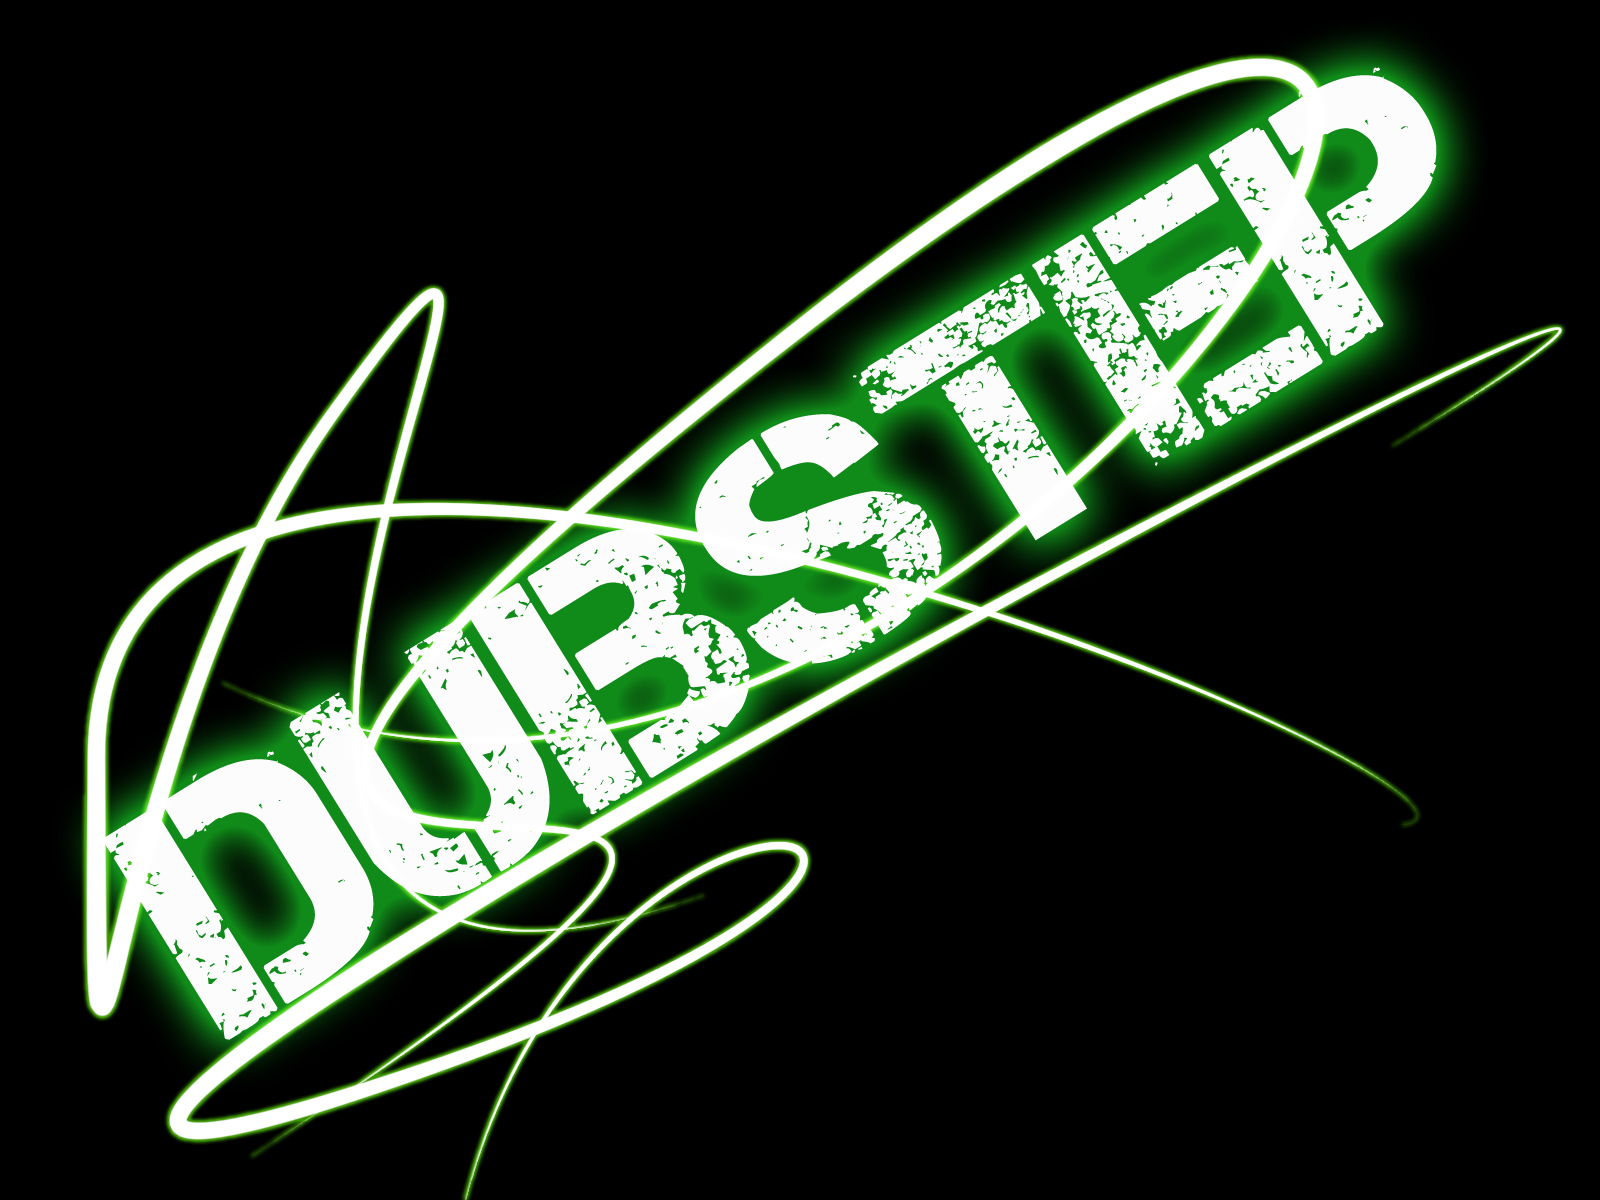 Abstract Dubstep Music 1600x1200